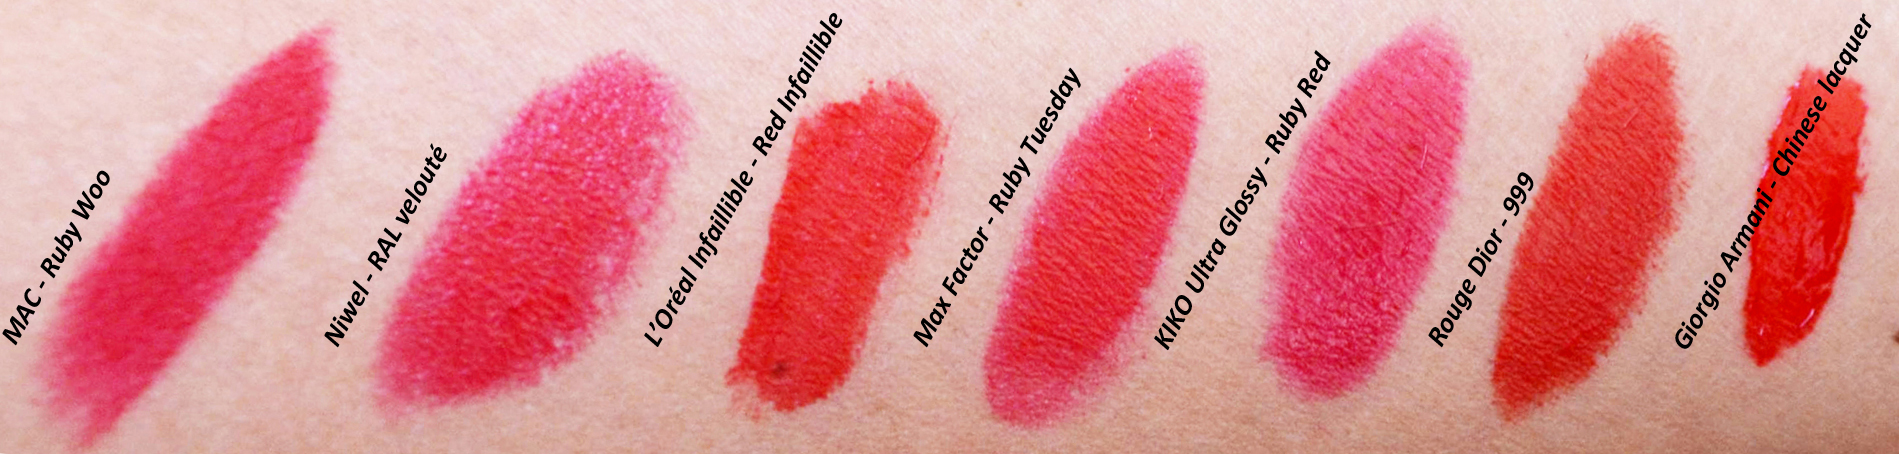 mercredie-blog-mode-geneve-beaute-maquillage-rouges-a-levres-rouge-lipstick-iconique-mac-ruby-niwel-giorgio-armani-l-oreal-dior-swatch-swatches-test2